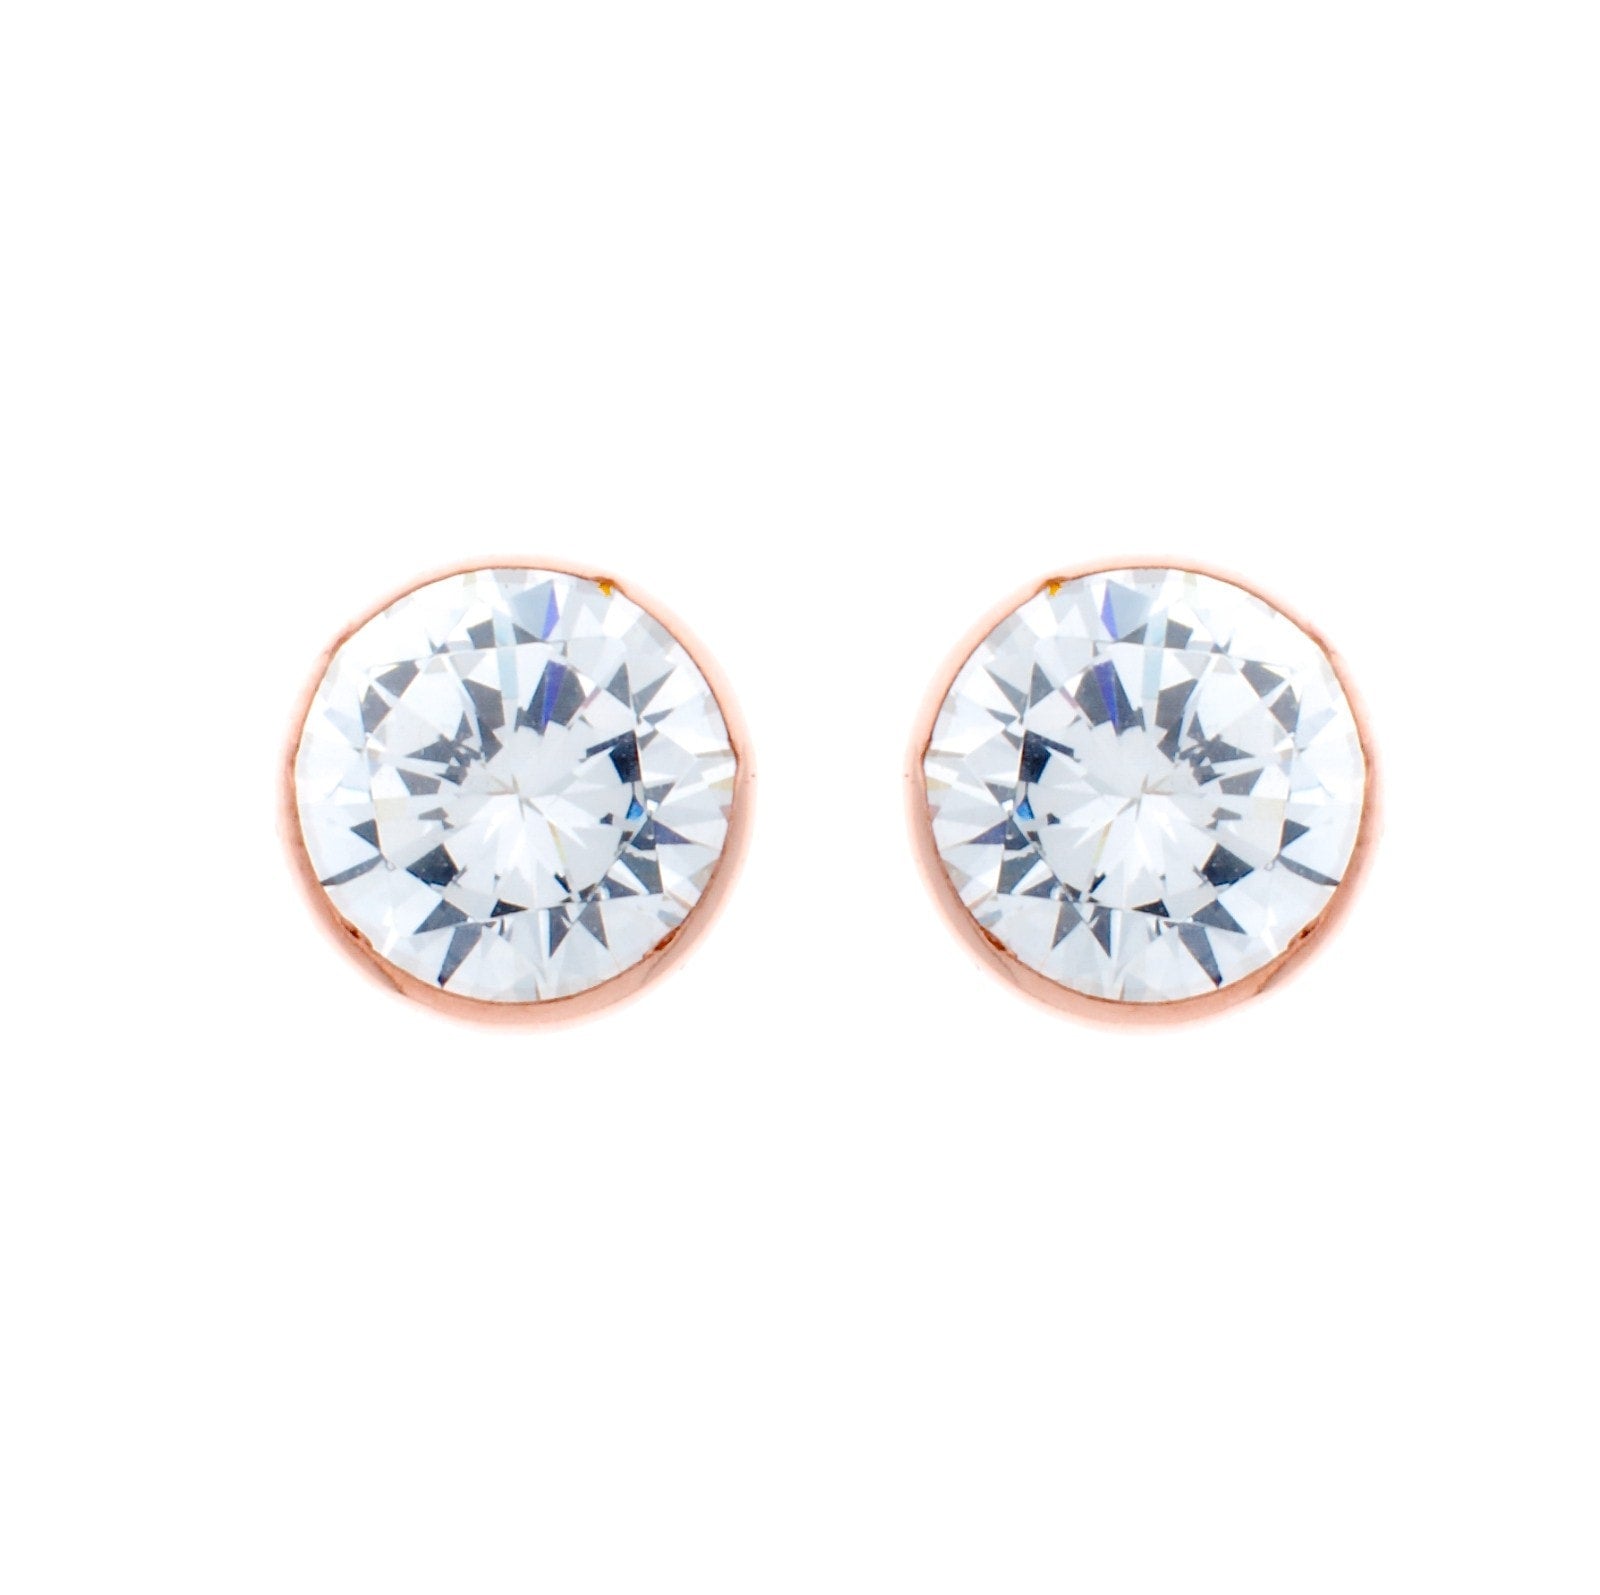 Sybella Earrings Sybella 8 Mm Cubic With Rose Gold Earring